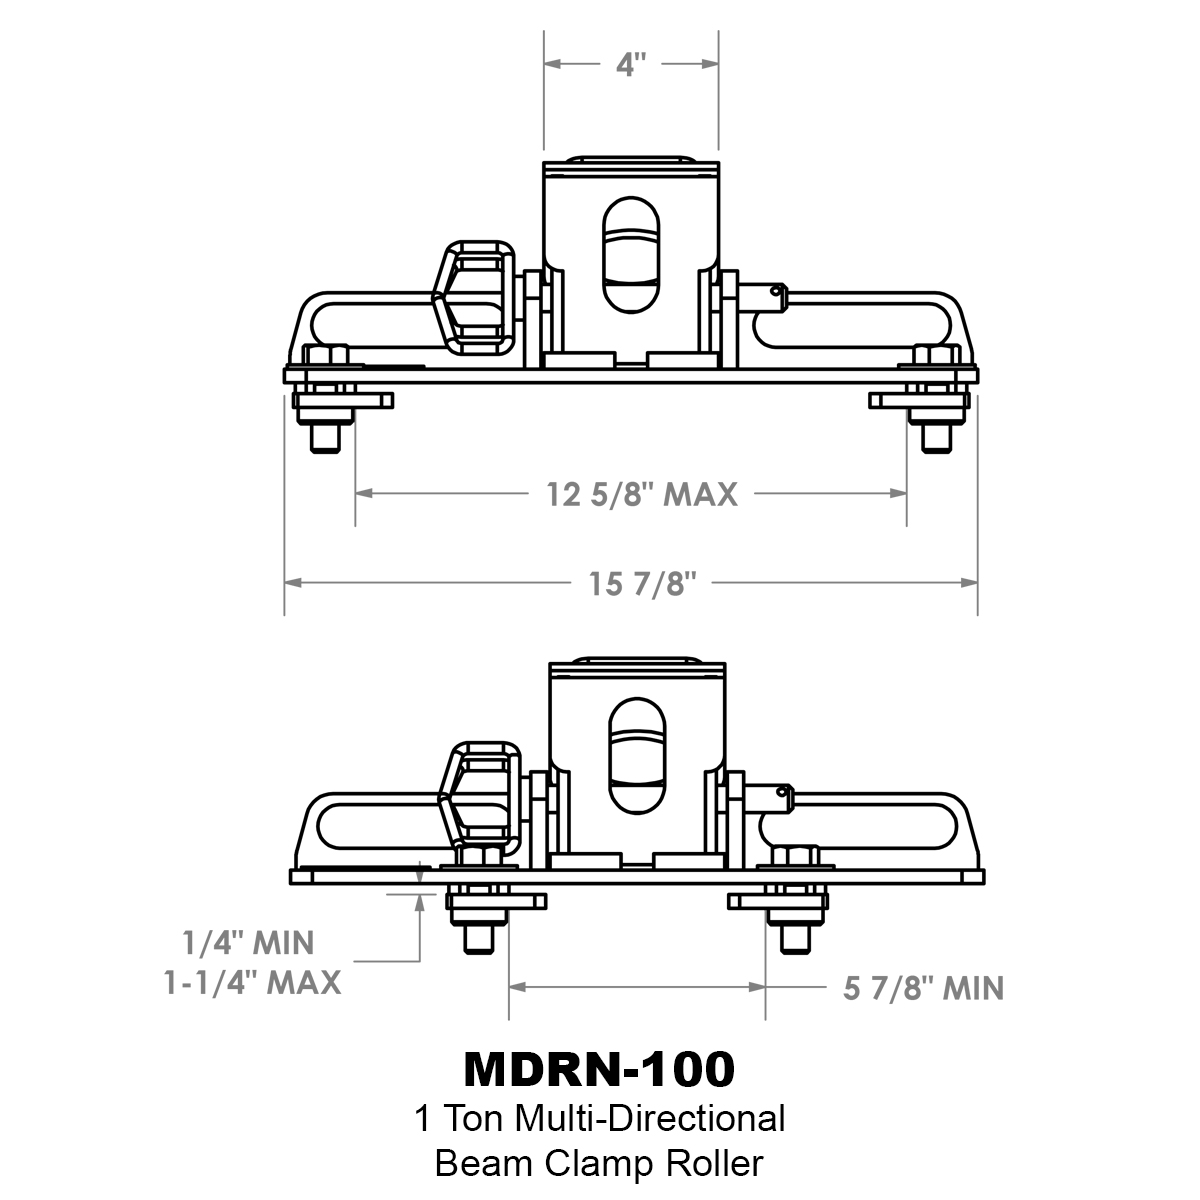 MDRN-100 2000 lbs beam clamp pipe rollers